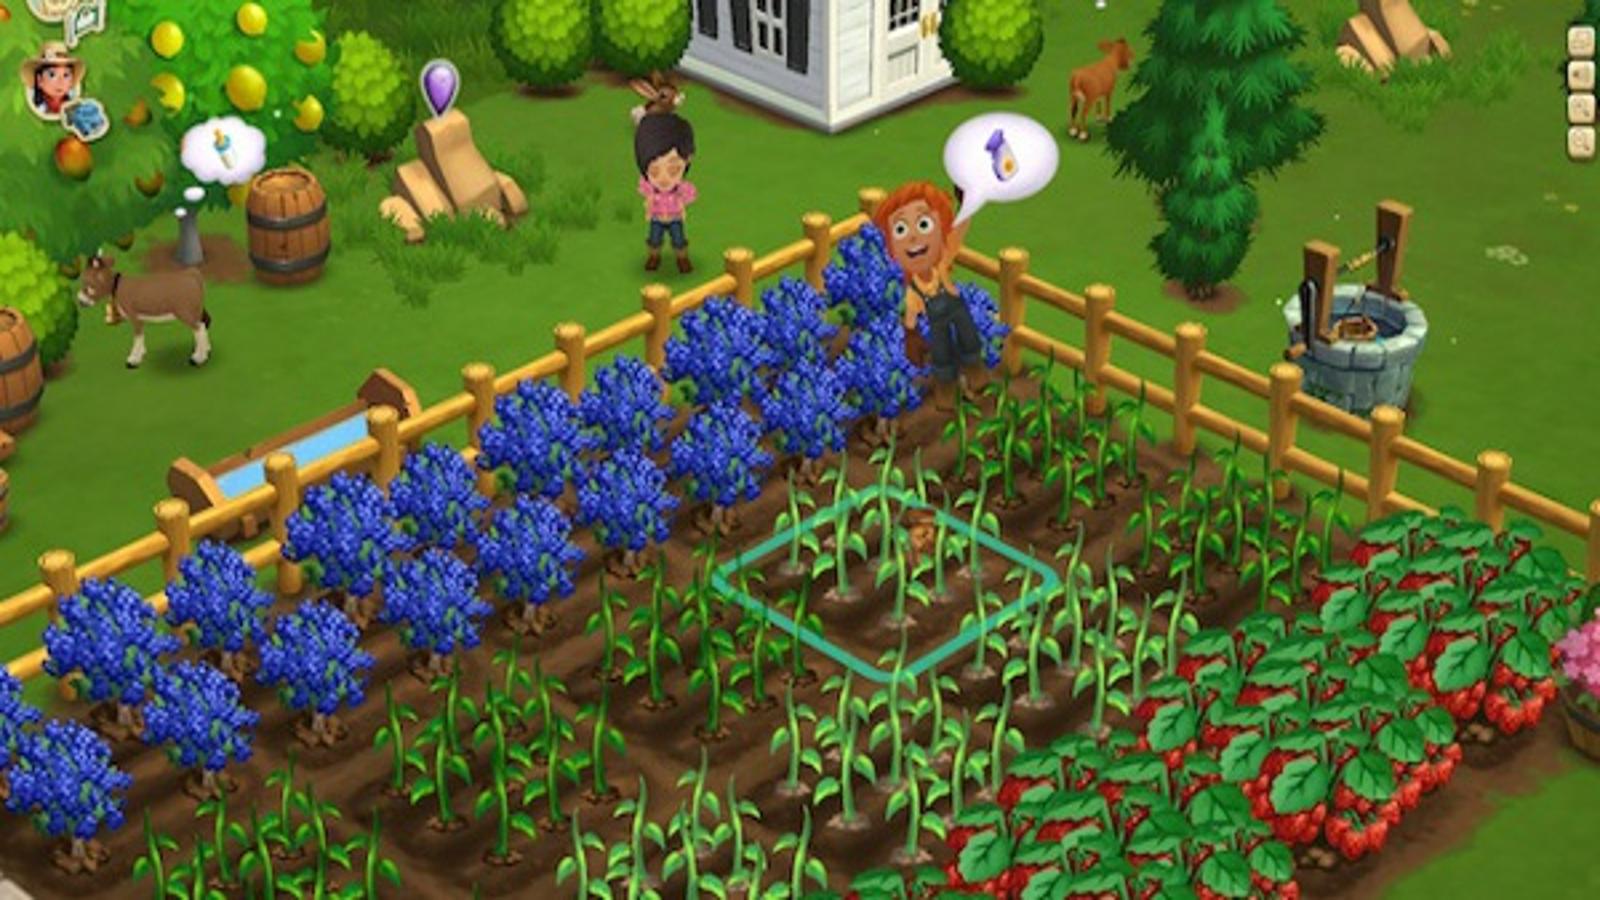 First look at FarmVille 2 on Facebook